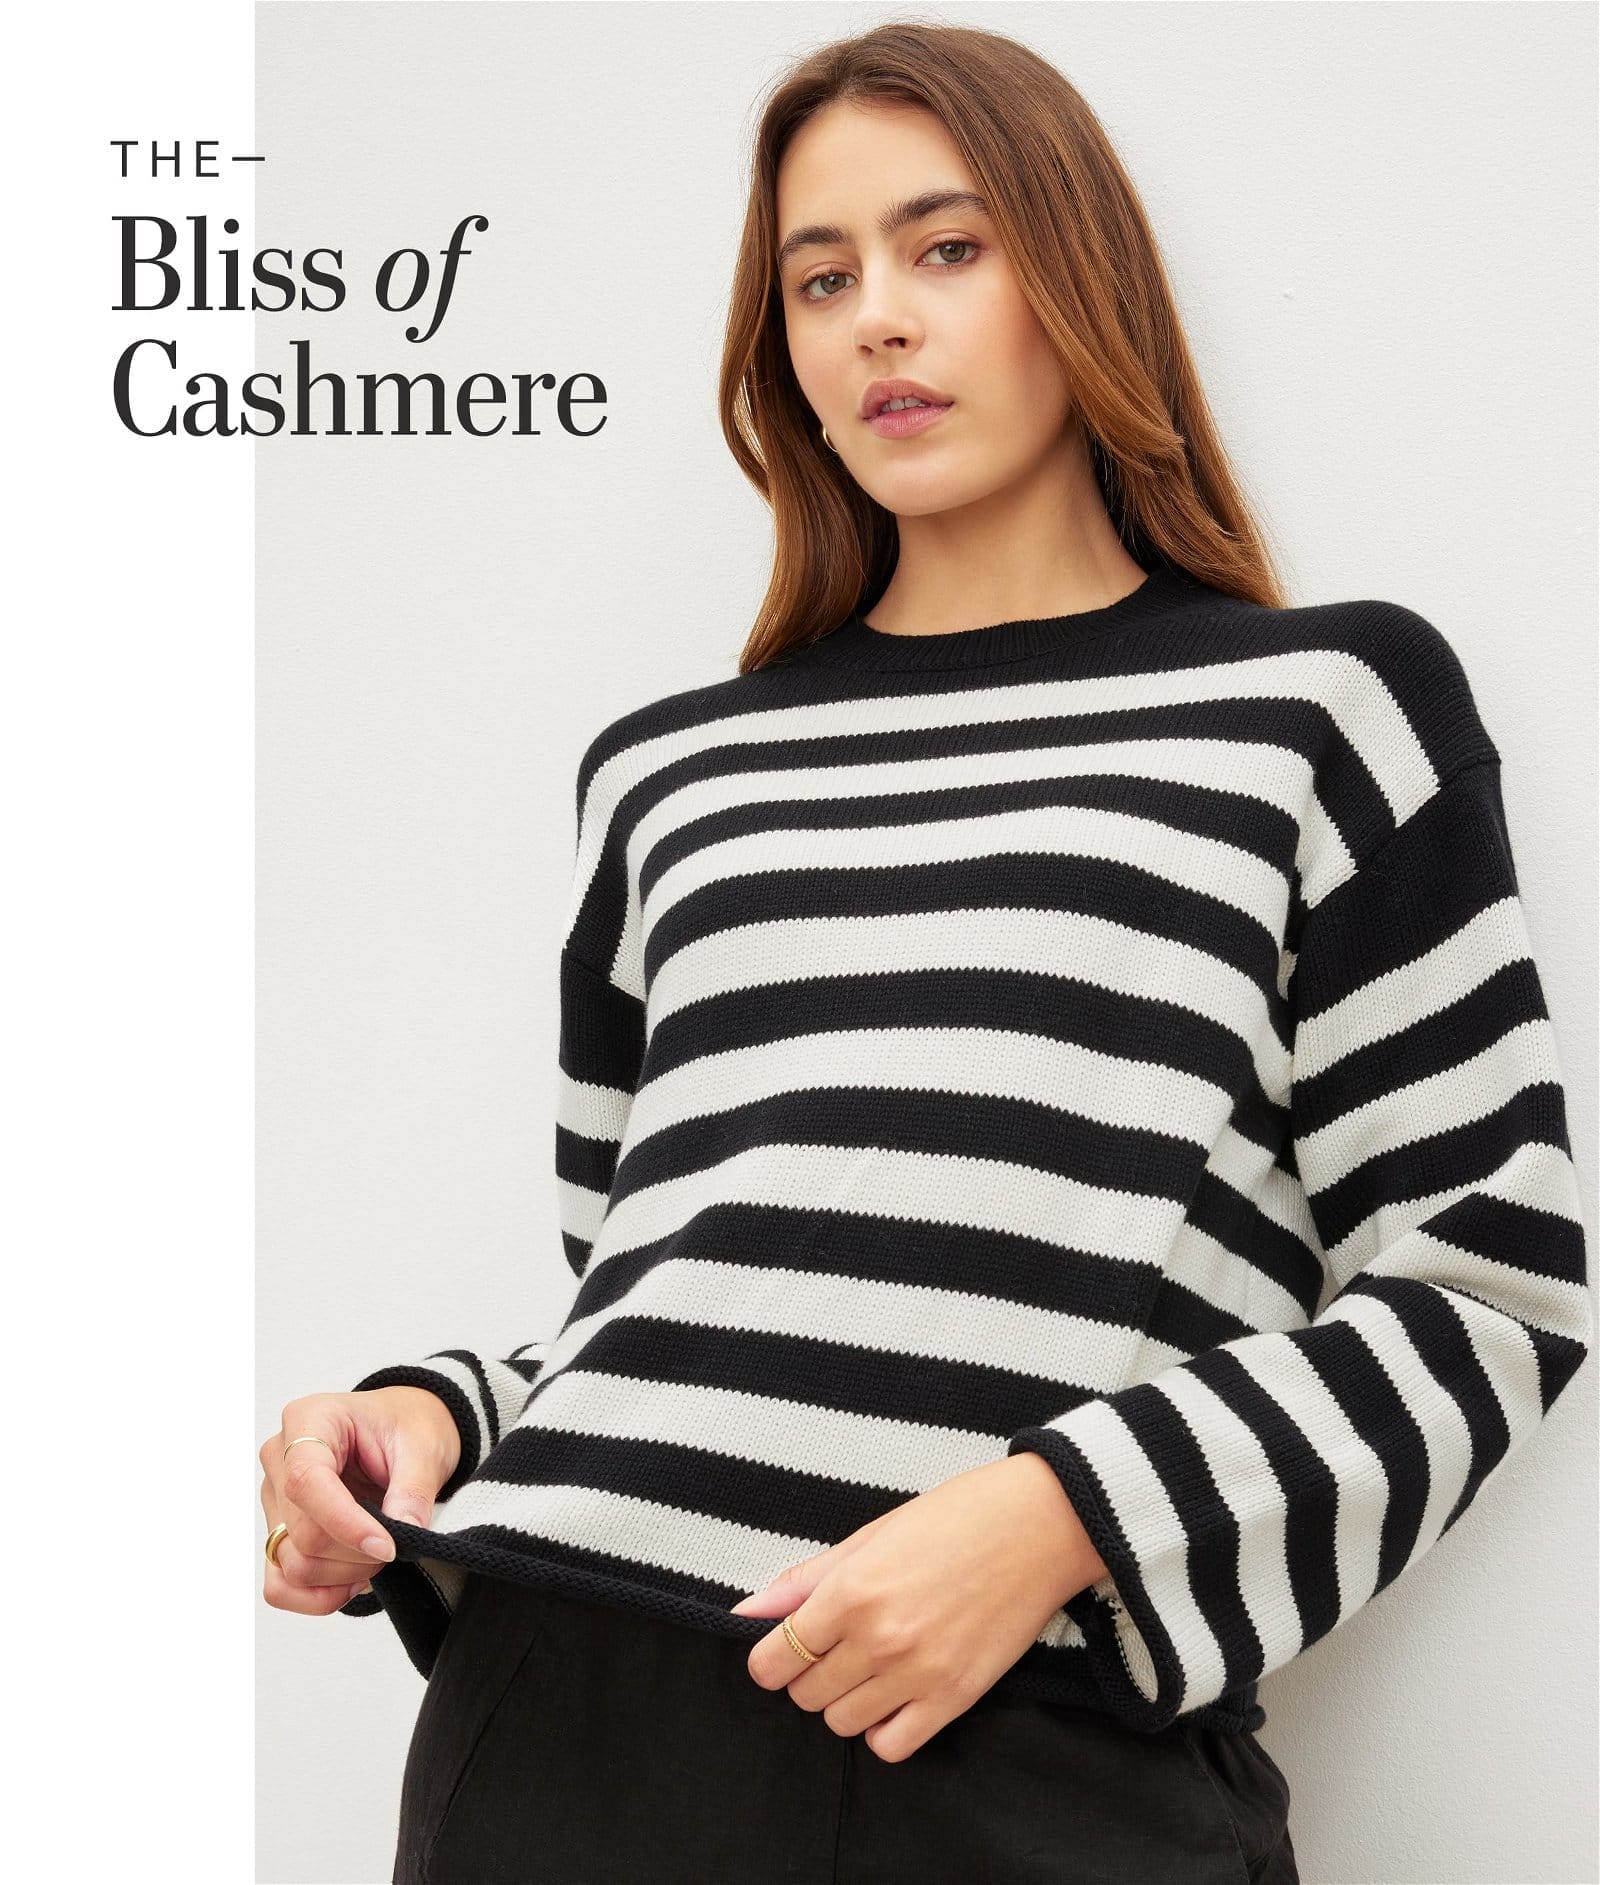 The Bliss of Cashmere